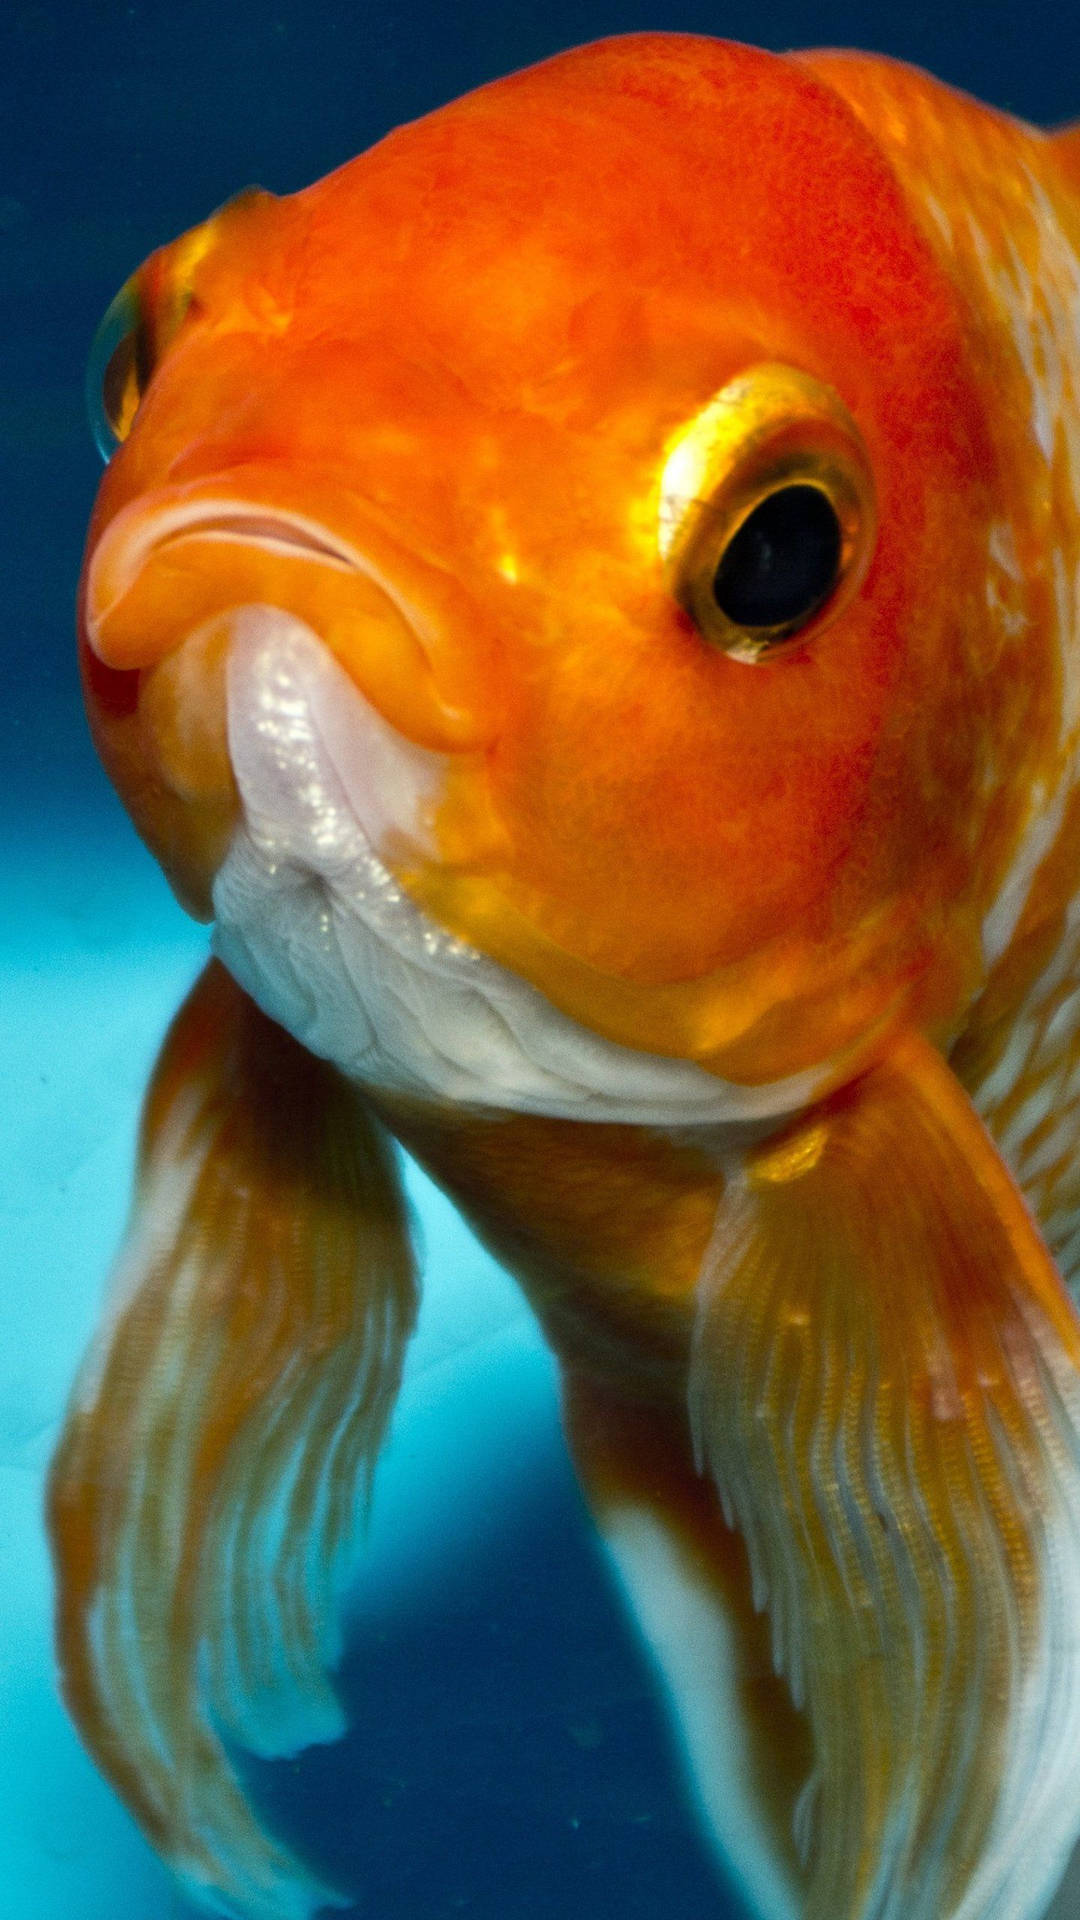 1440X2560 Fish Wallpaper and Background